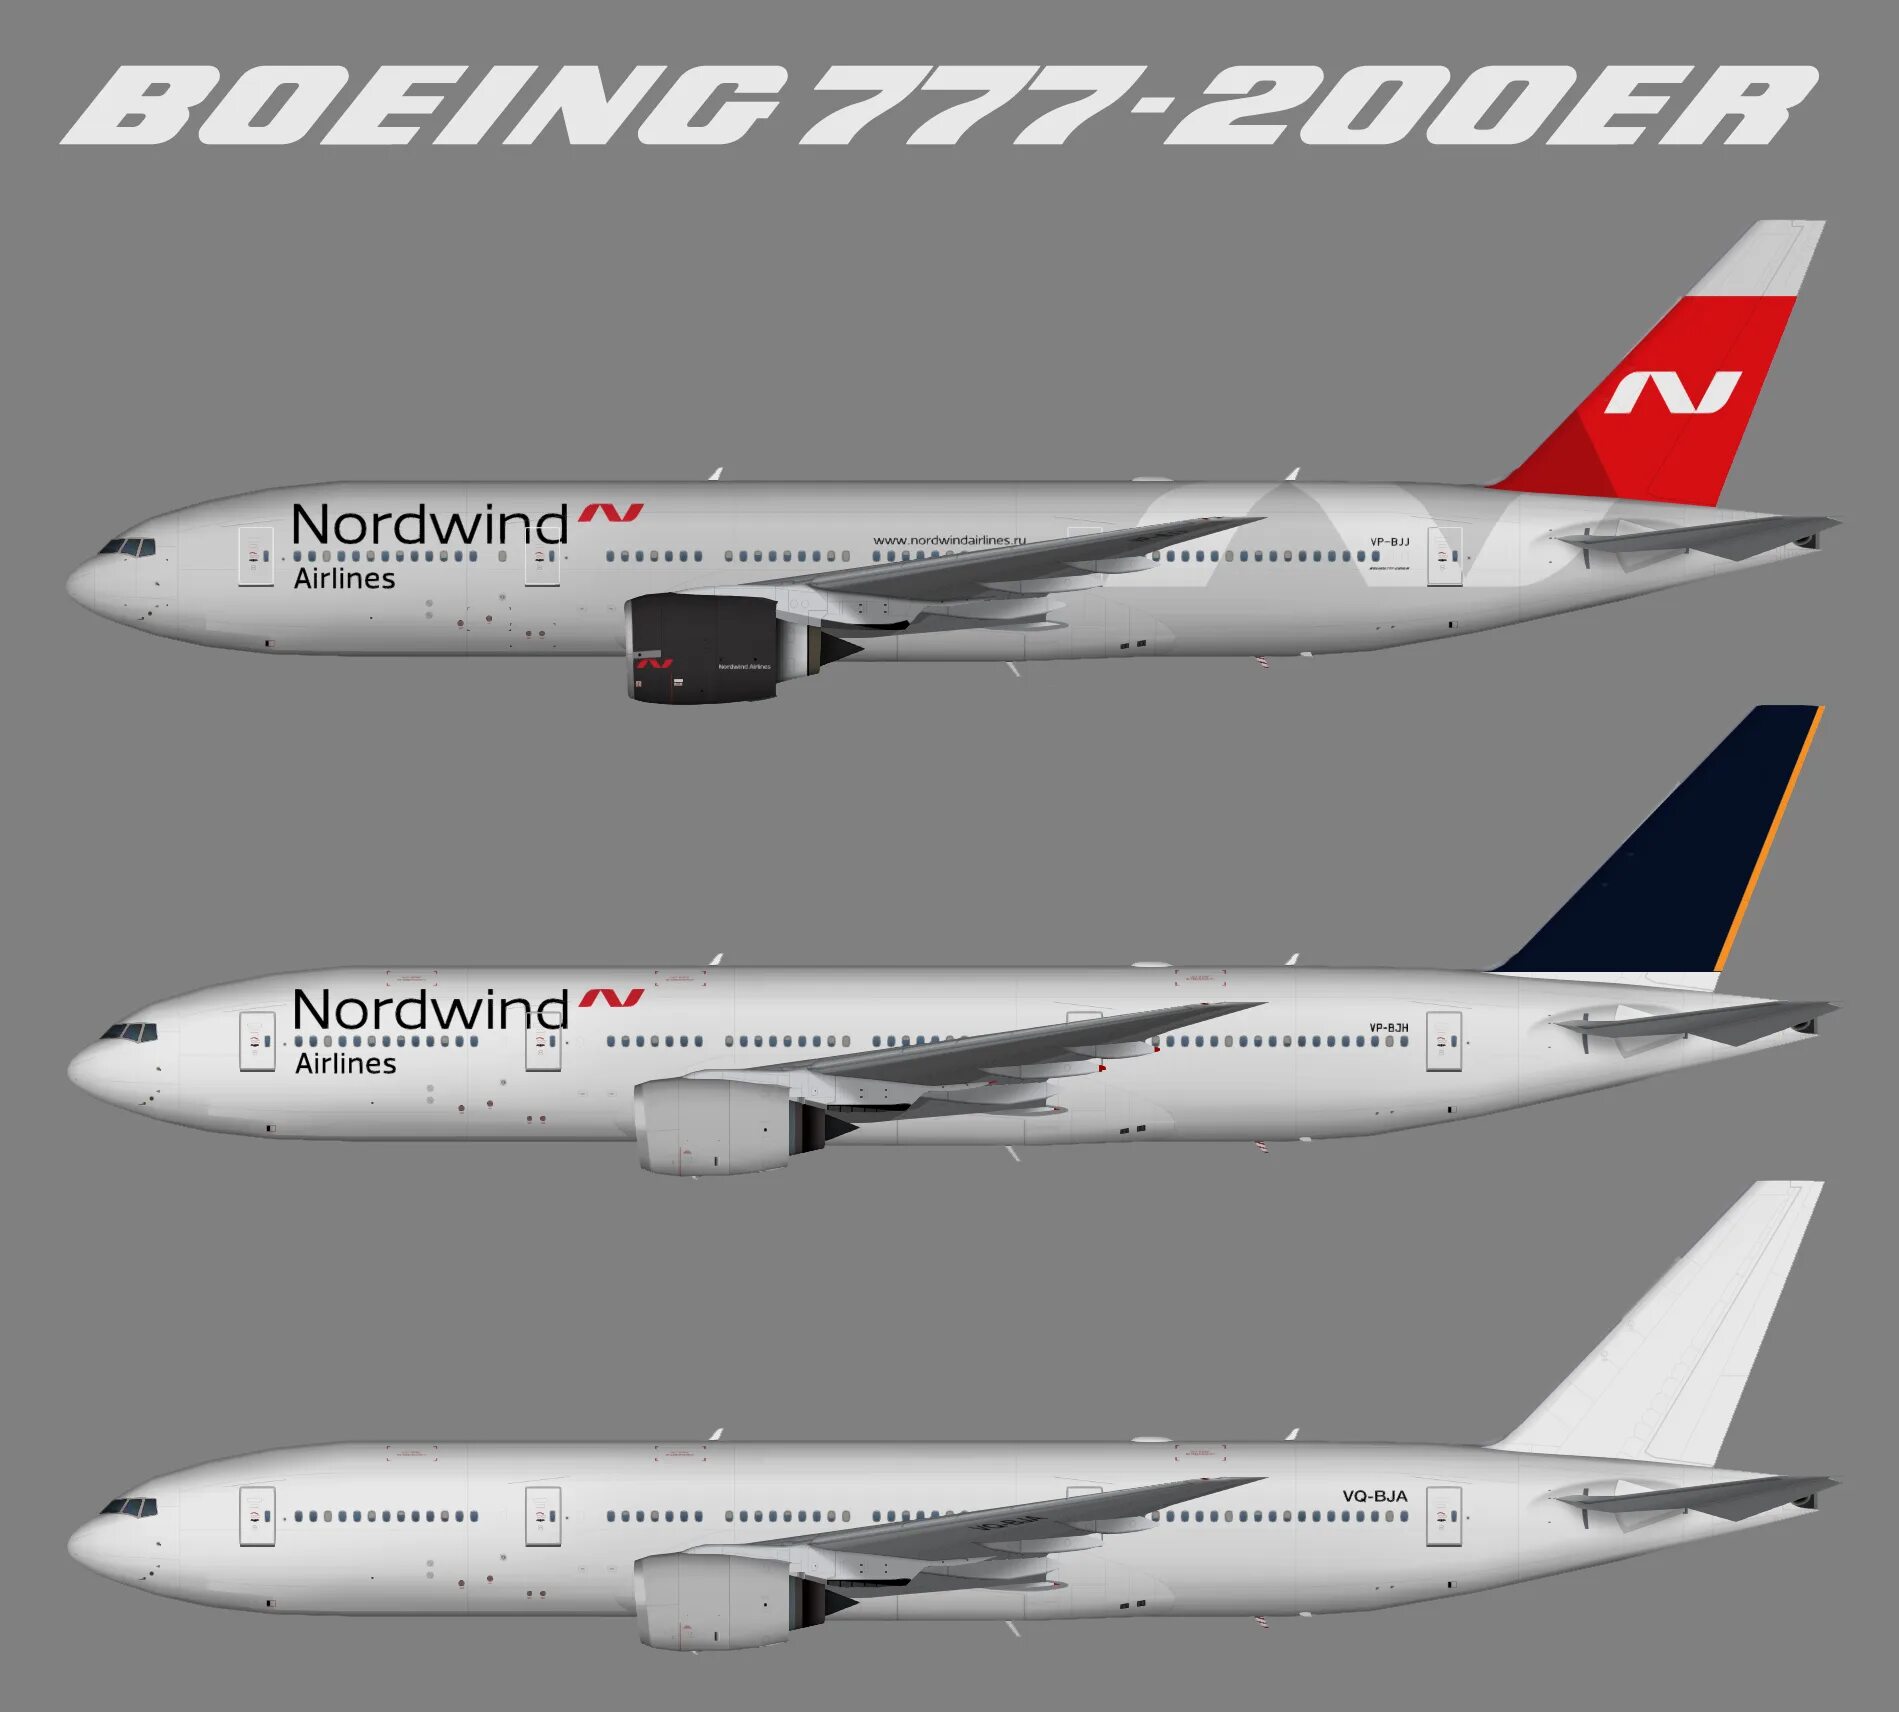 Boeing 777 Nordwind Airlines. 777-300er Норд Винд. Боинг 777 300 er Норд Винд. Боинг 777 200 er Норд Винд. Southwind boeing 777